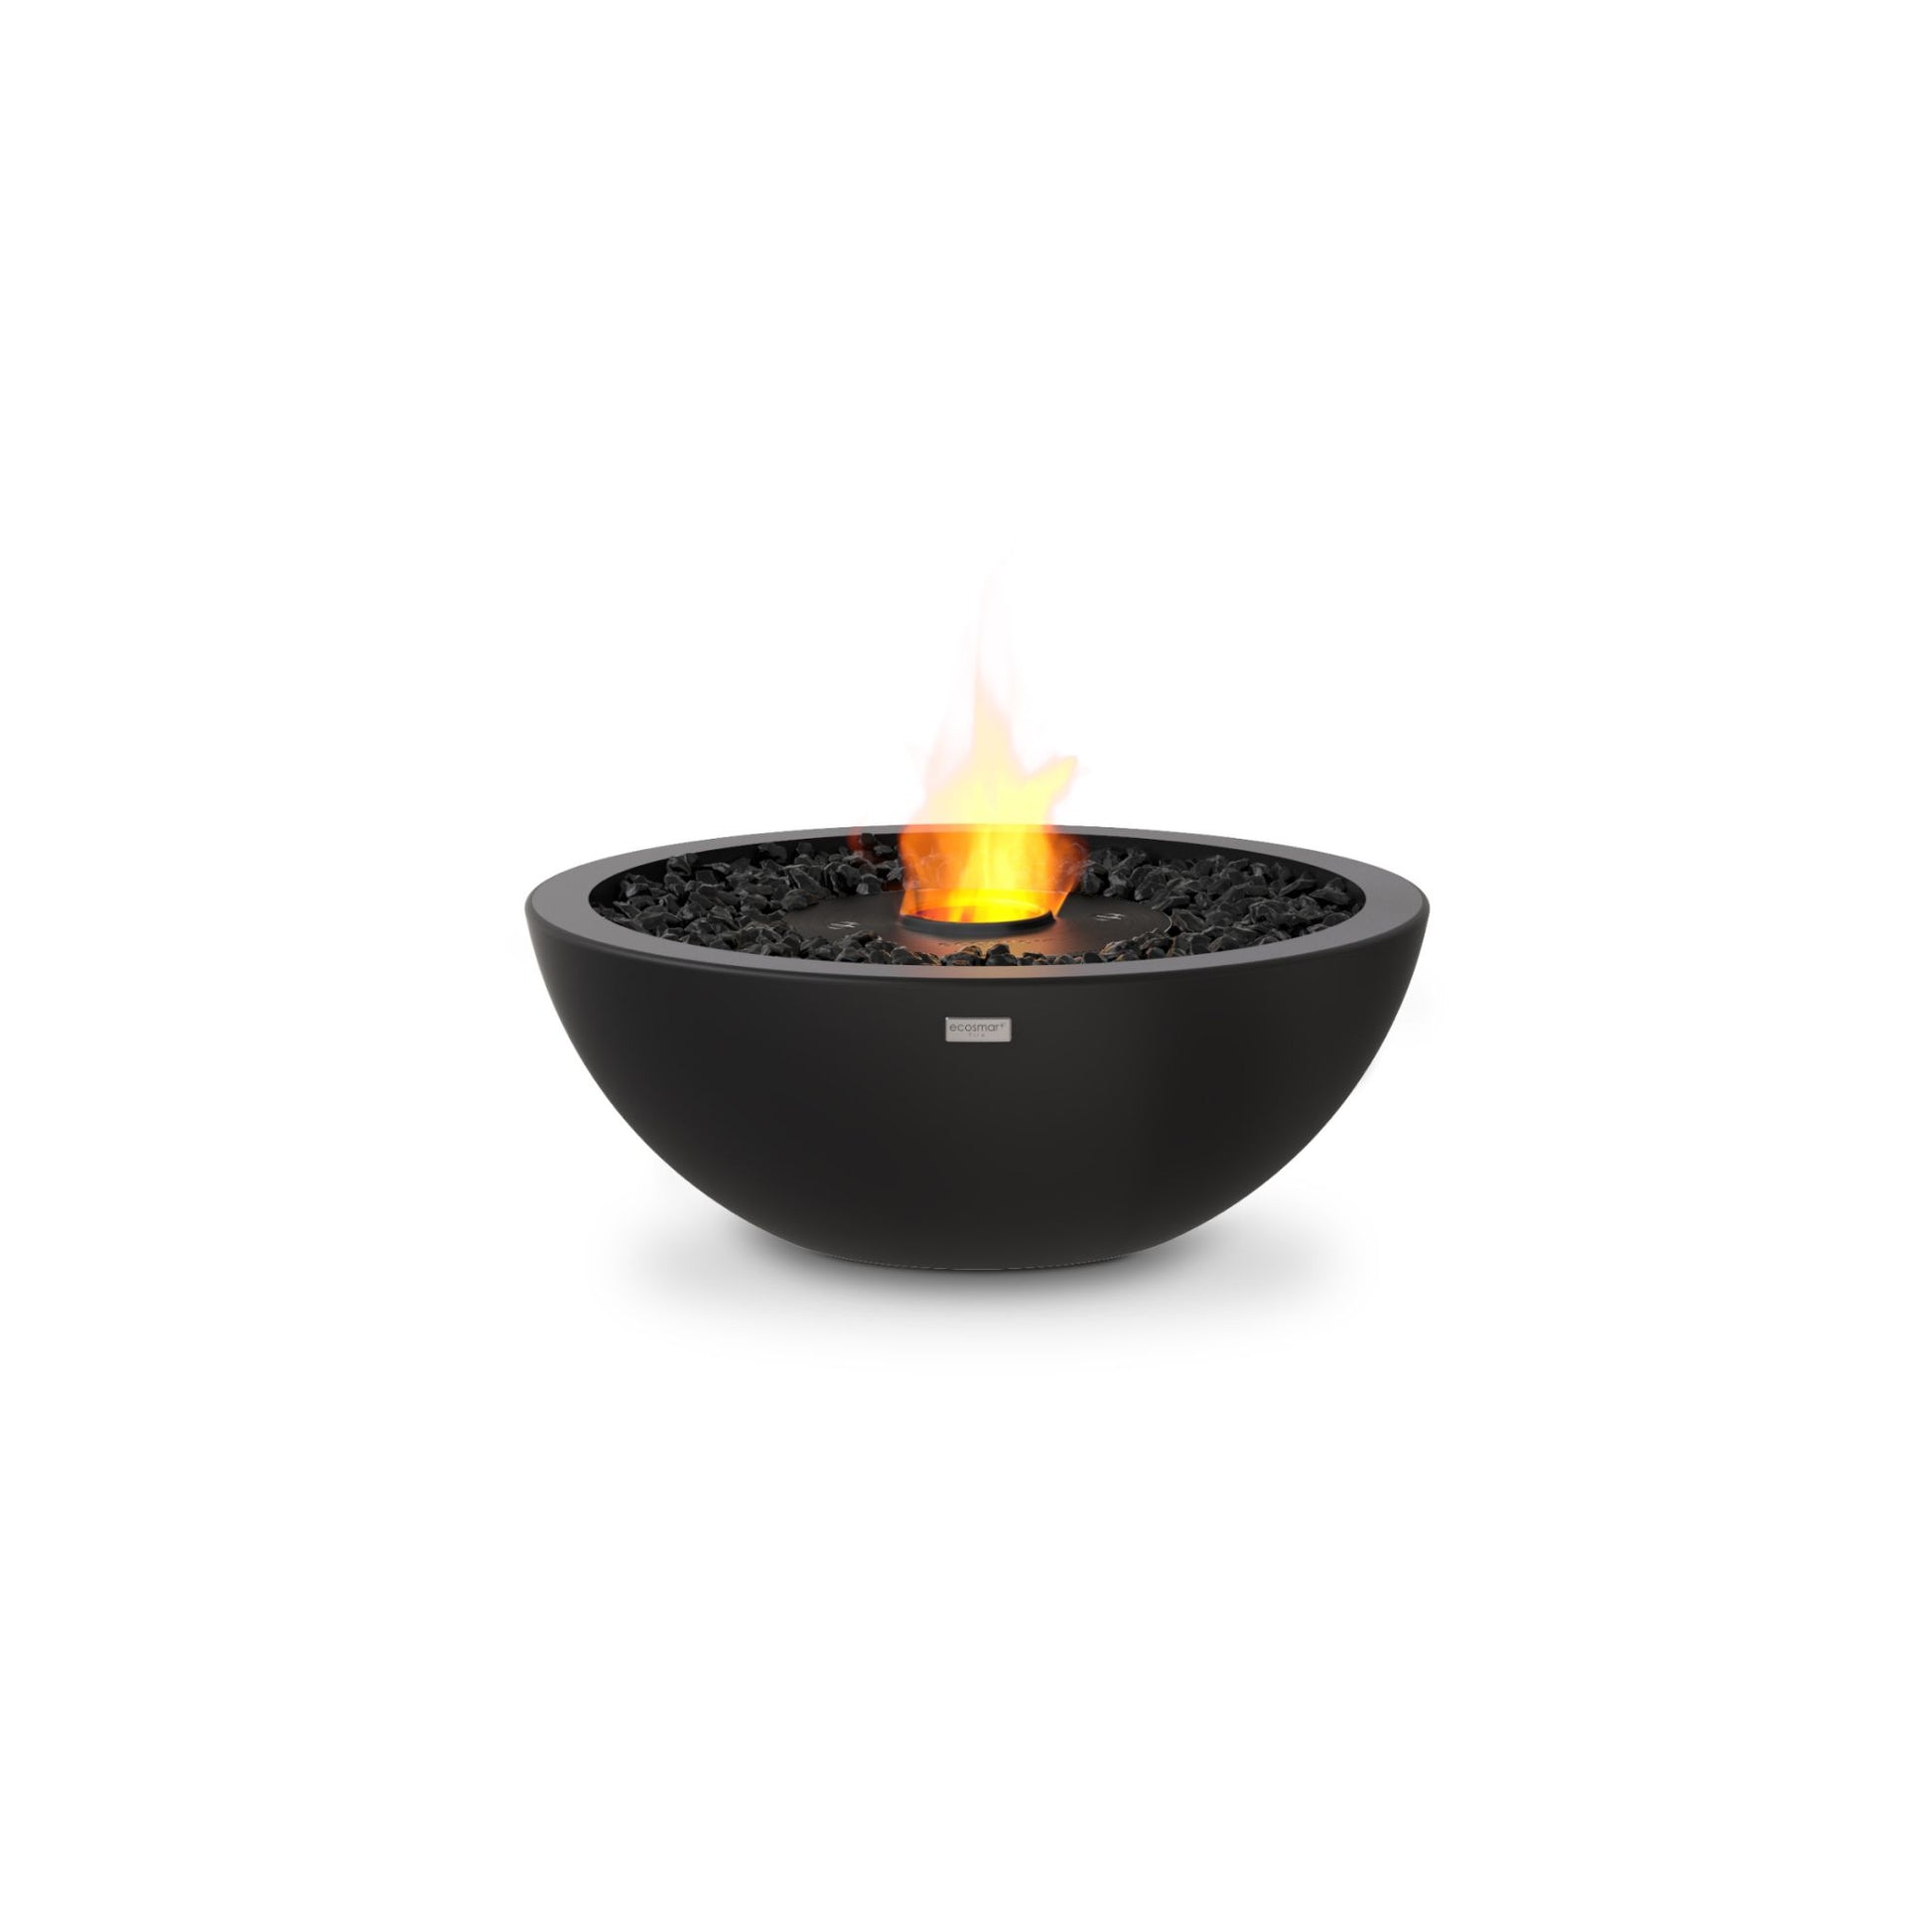 Ecosmart Fire Mix 600 bioethanol fire pit bowl in black concrete with black steel burner on a white background